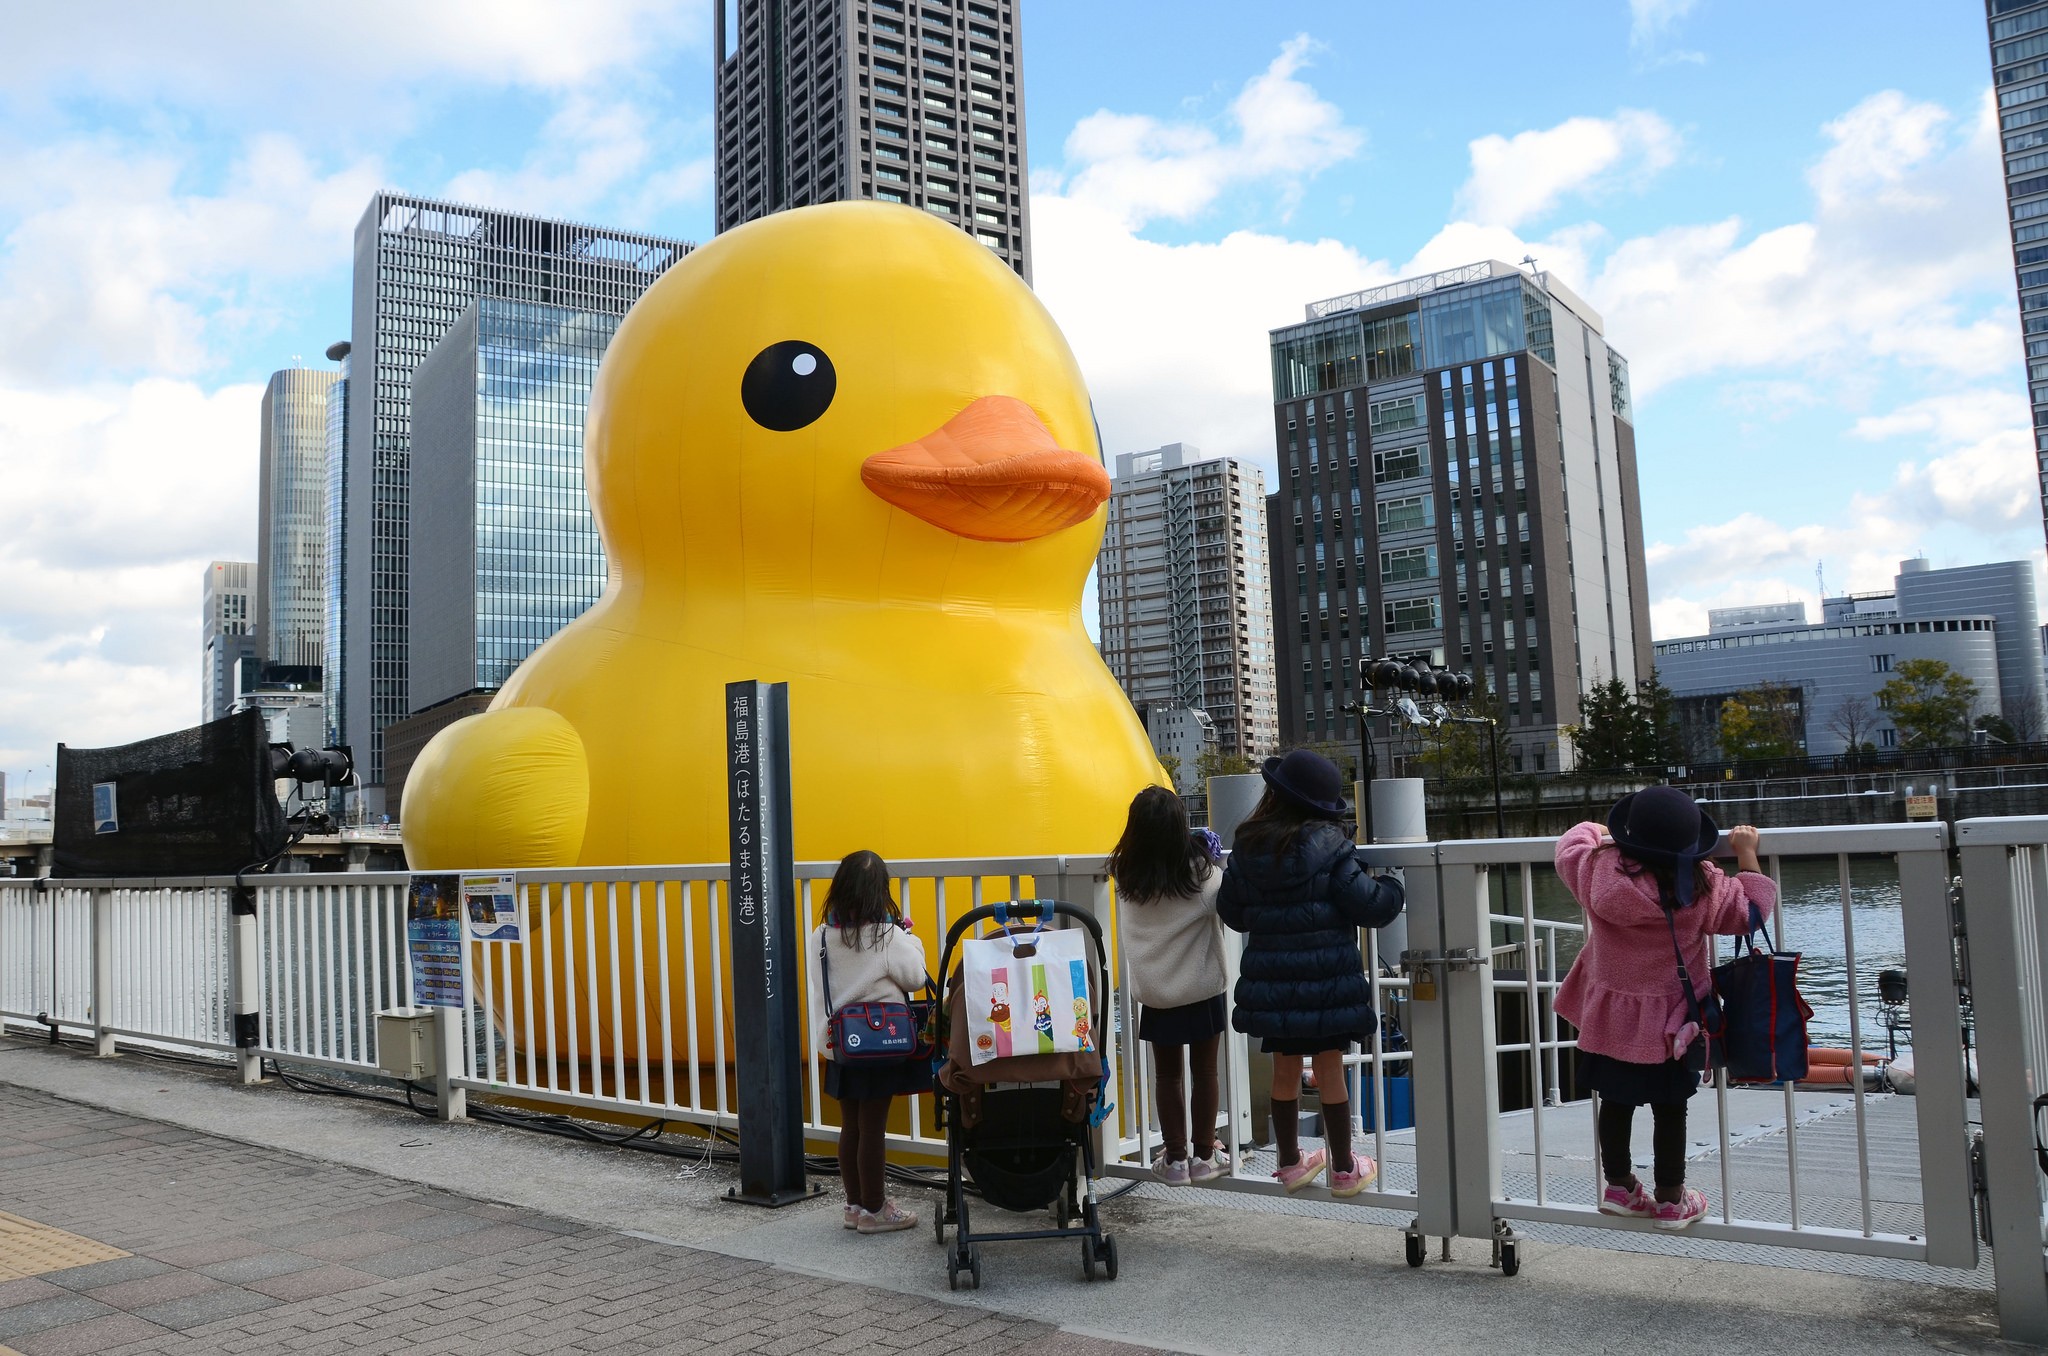 Ontario Giant Rubber Duck Is Counterfeit, Says Artist Who Created